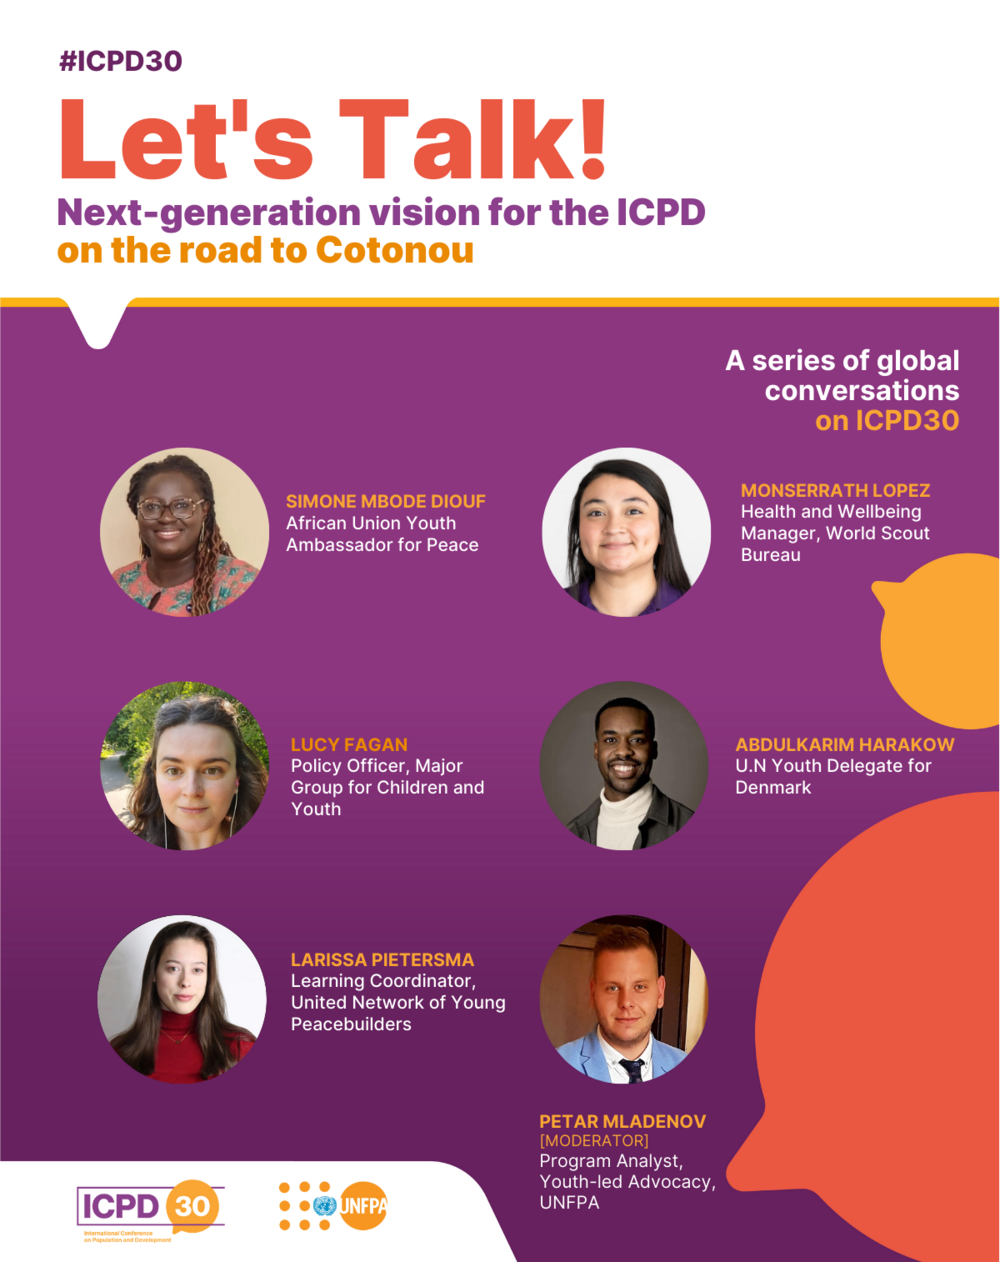 An image of speakers and events taking place at the ICPD global youth dialogue. 